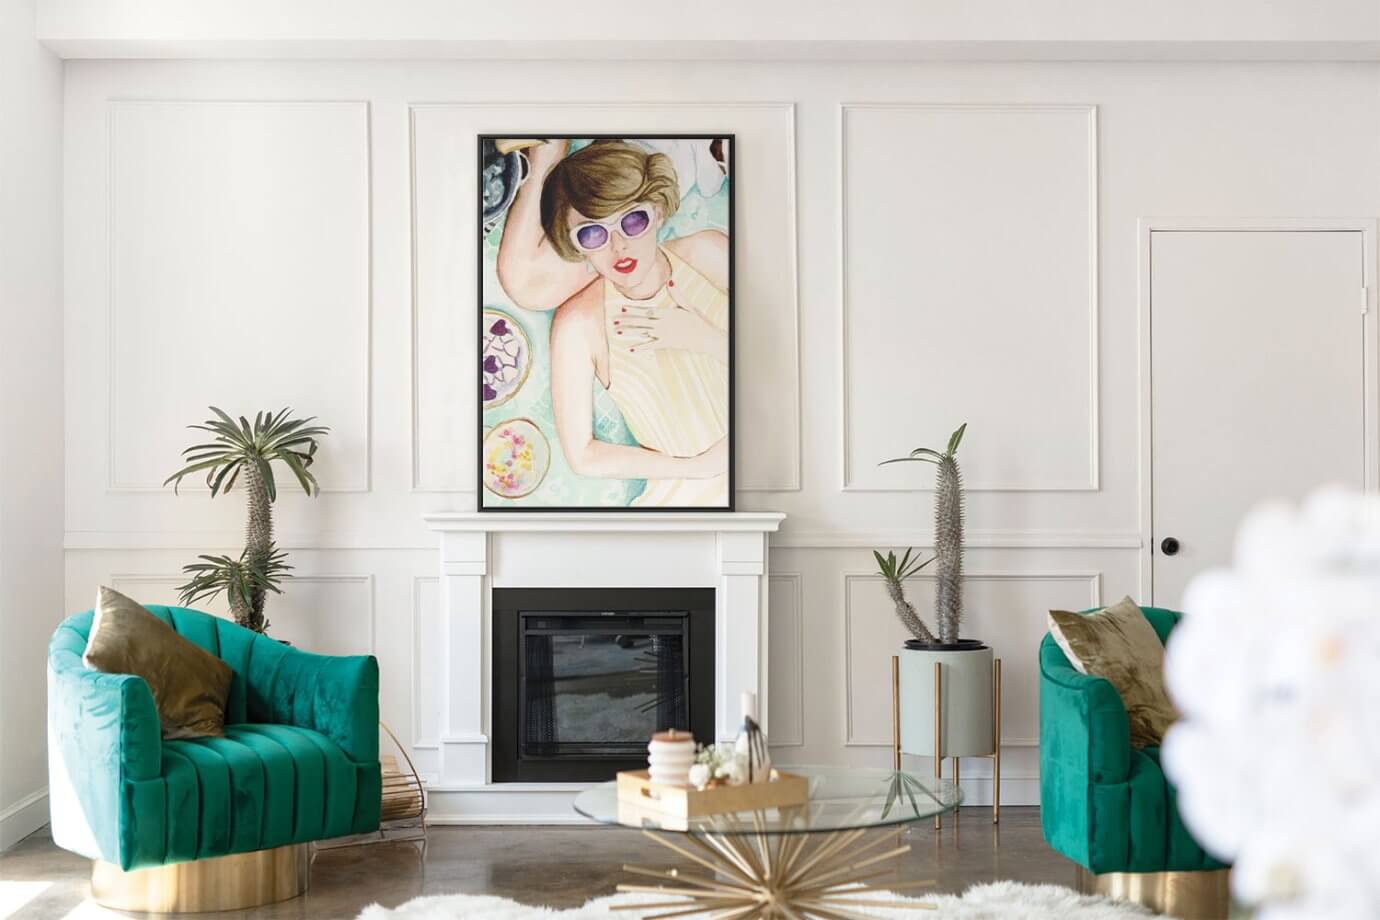 Taylor Swift from the Blank Space in contemporary living room.